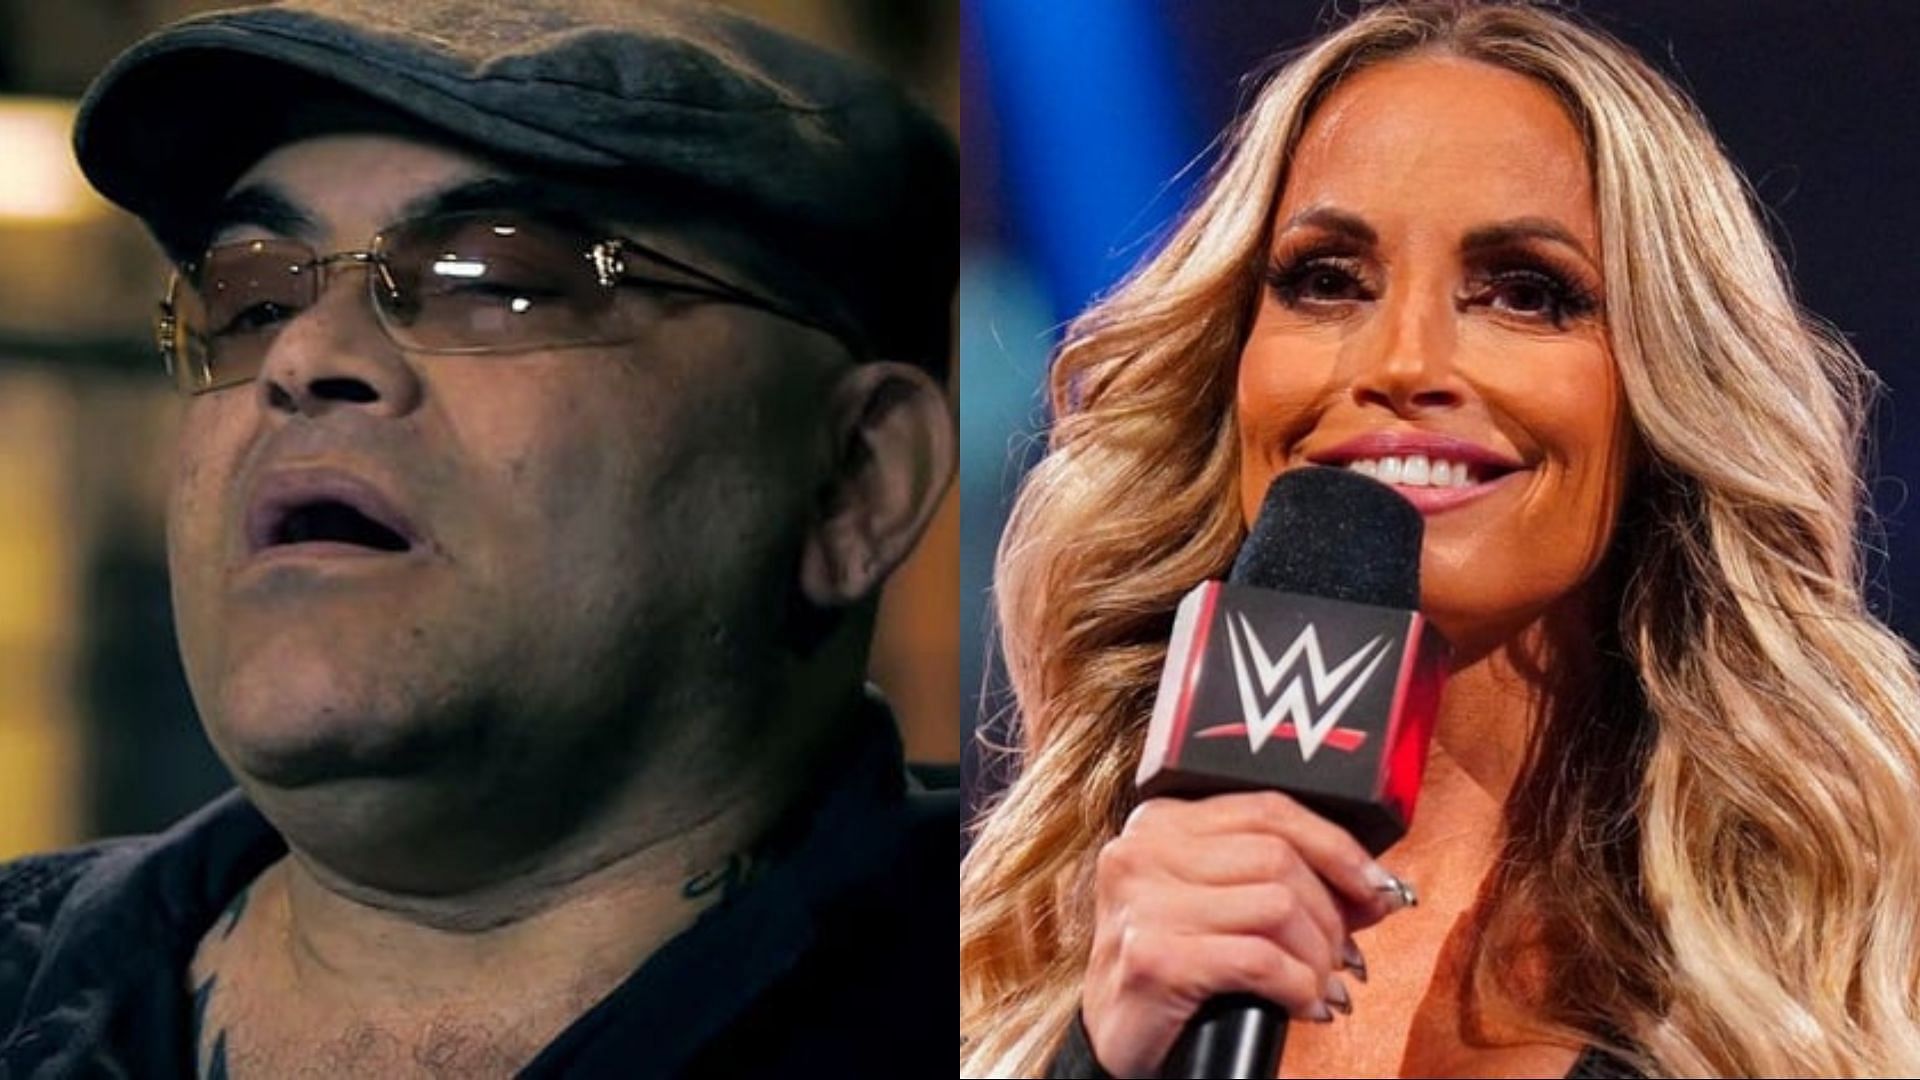 Konnan is a former WCW wrestler, and Trish Stratus is a WWE legend